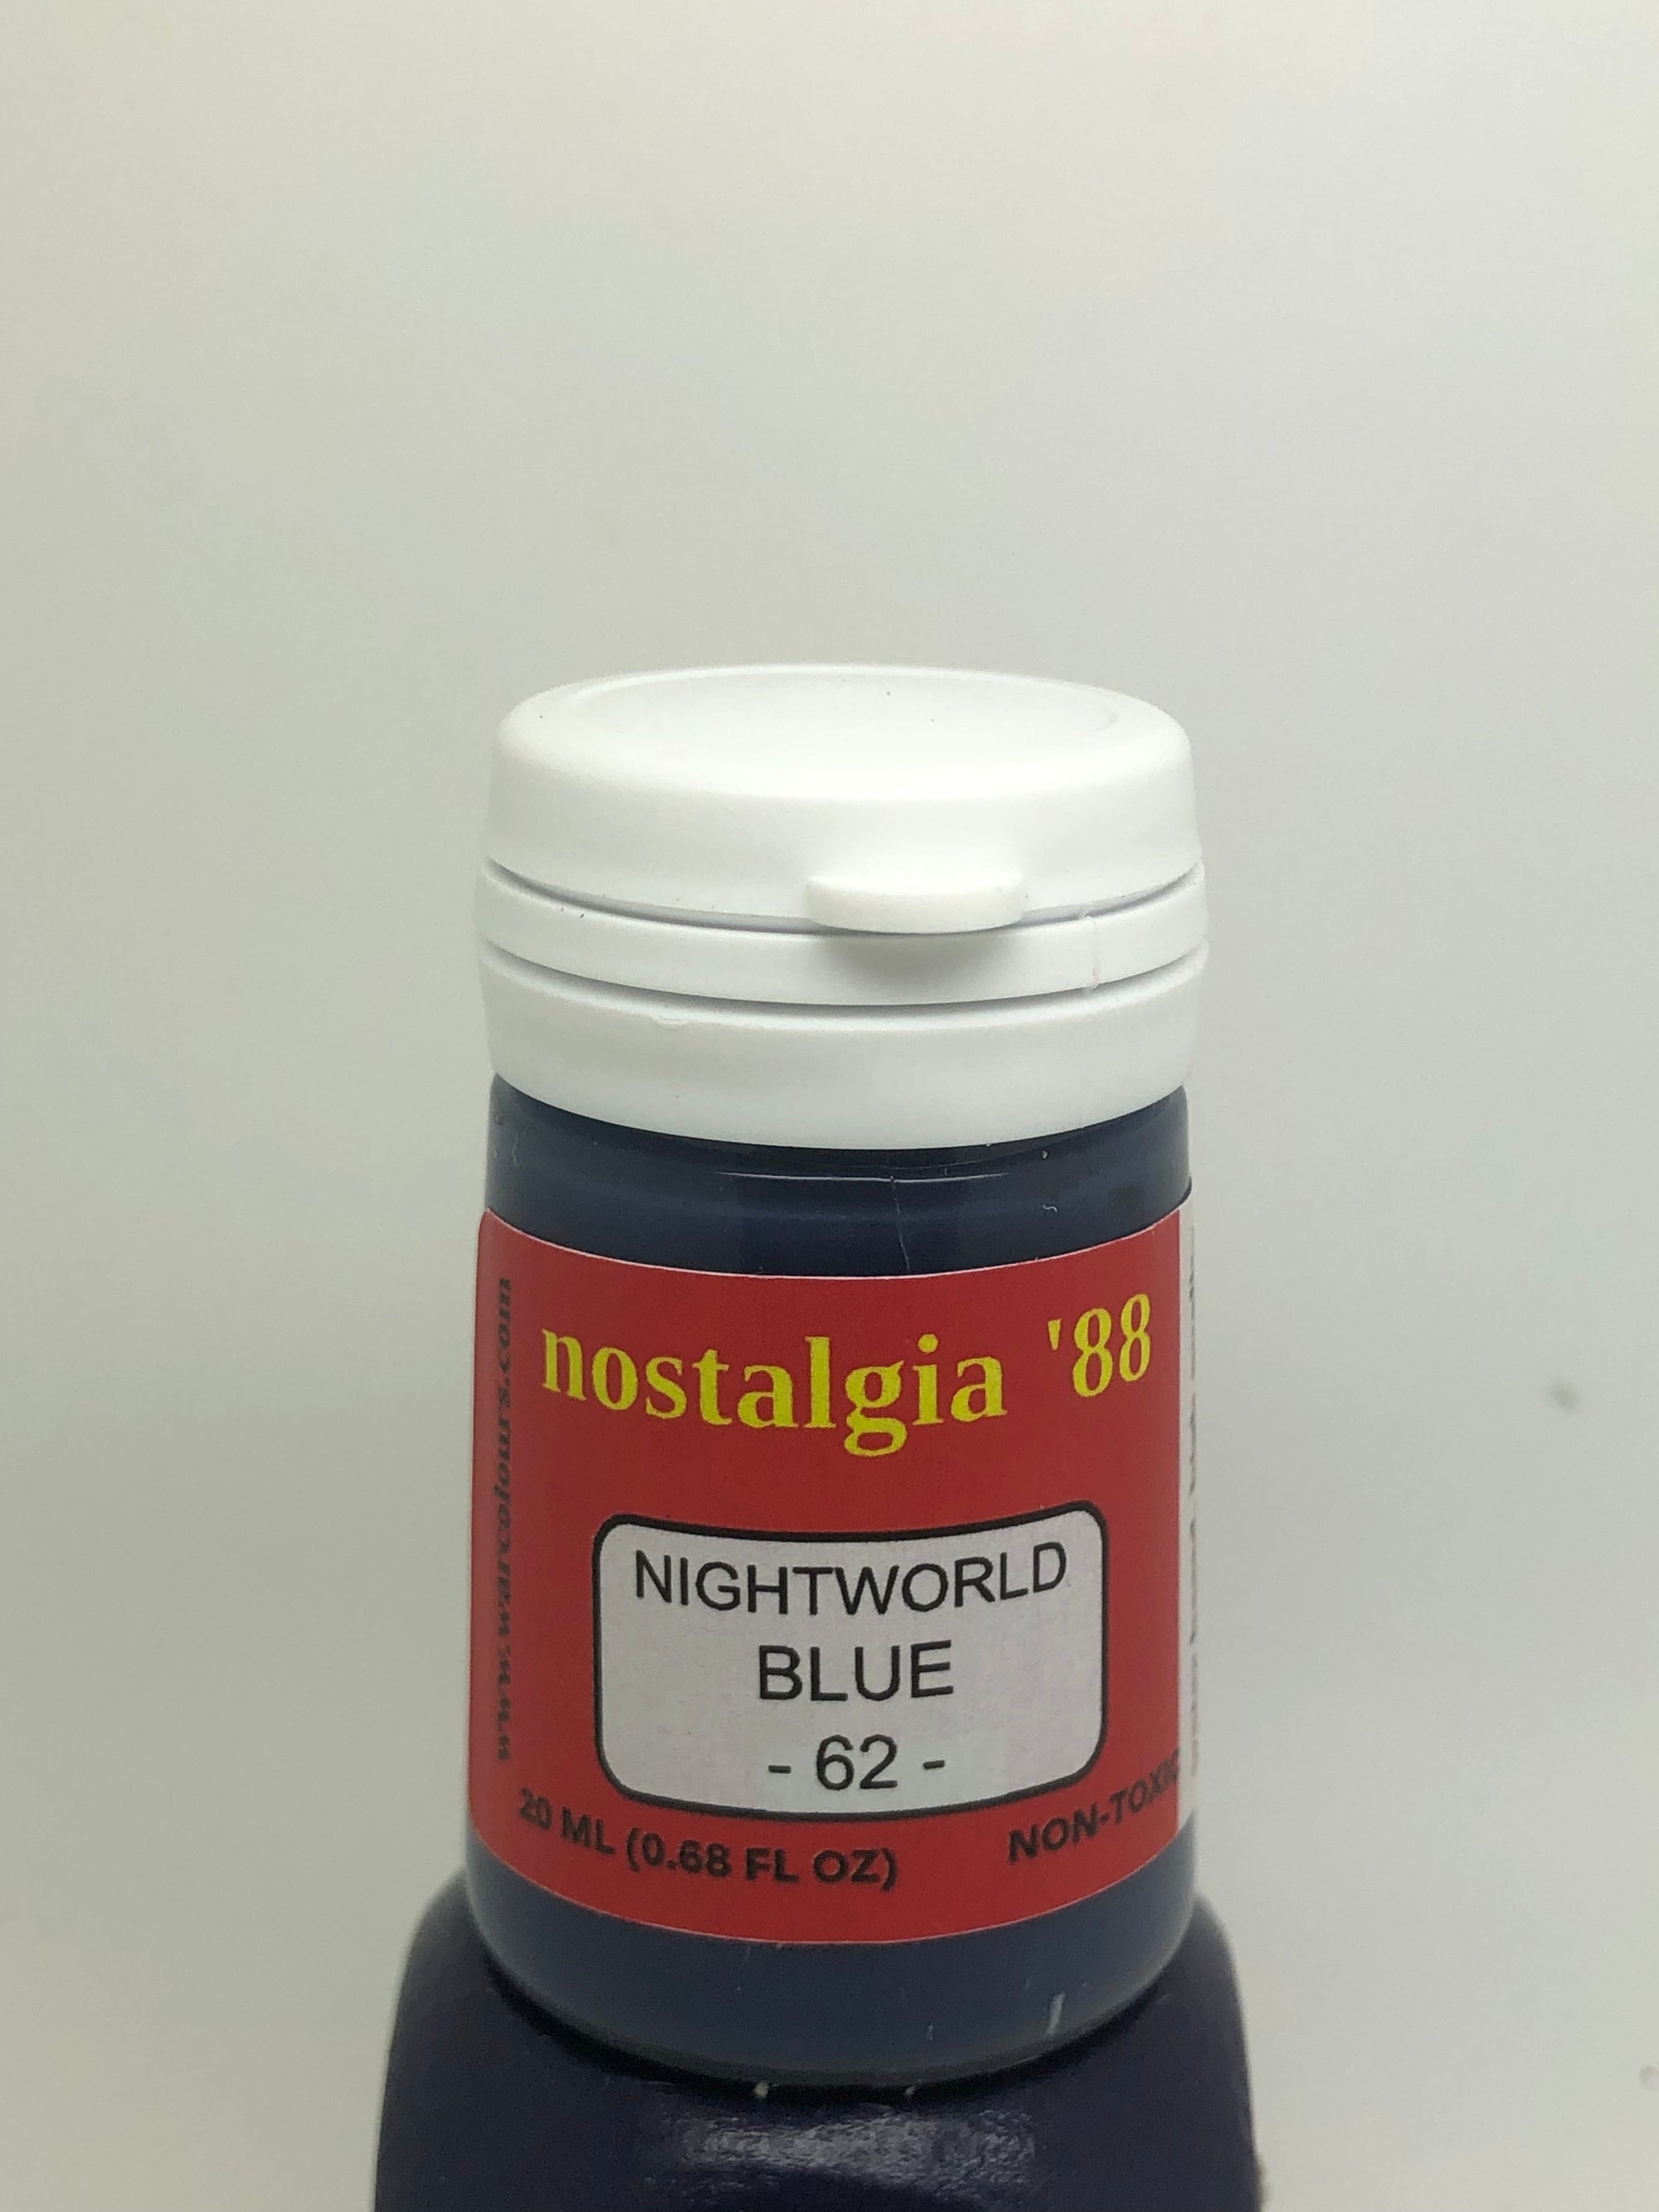 #62 - Nightworld Blue Oldhammer Classic Retro Acrylic Paint Paint Warcolours Exit 23 Games #62 - Nightworld Blue Oldhammer Classic Retro Acrylic Paint